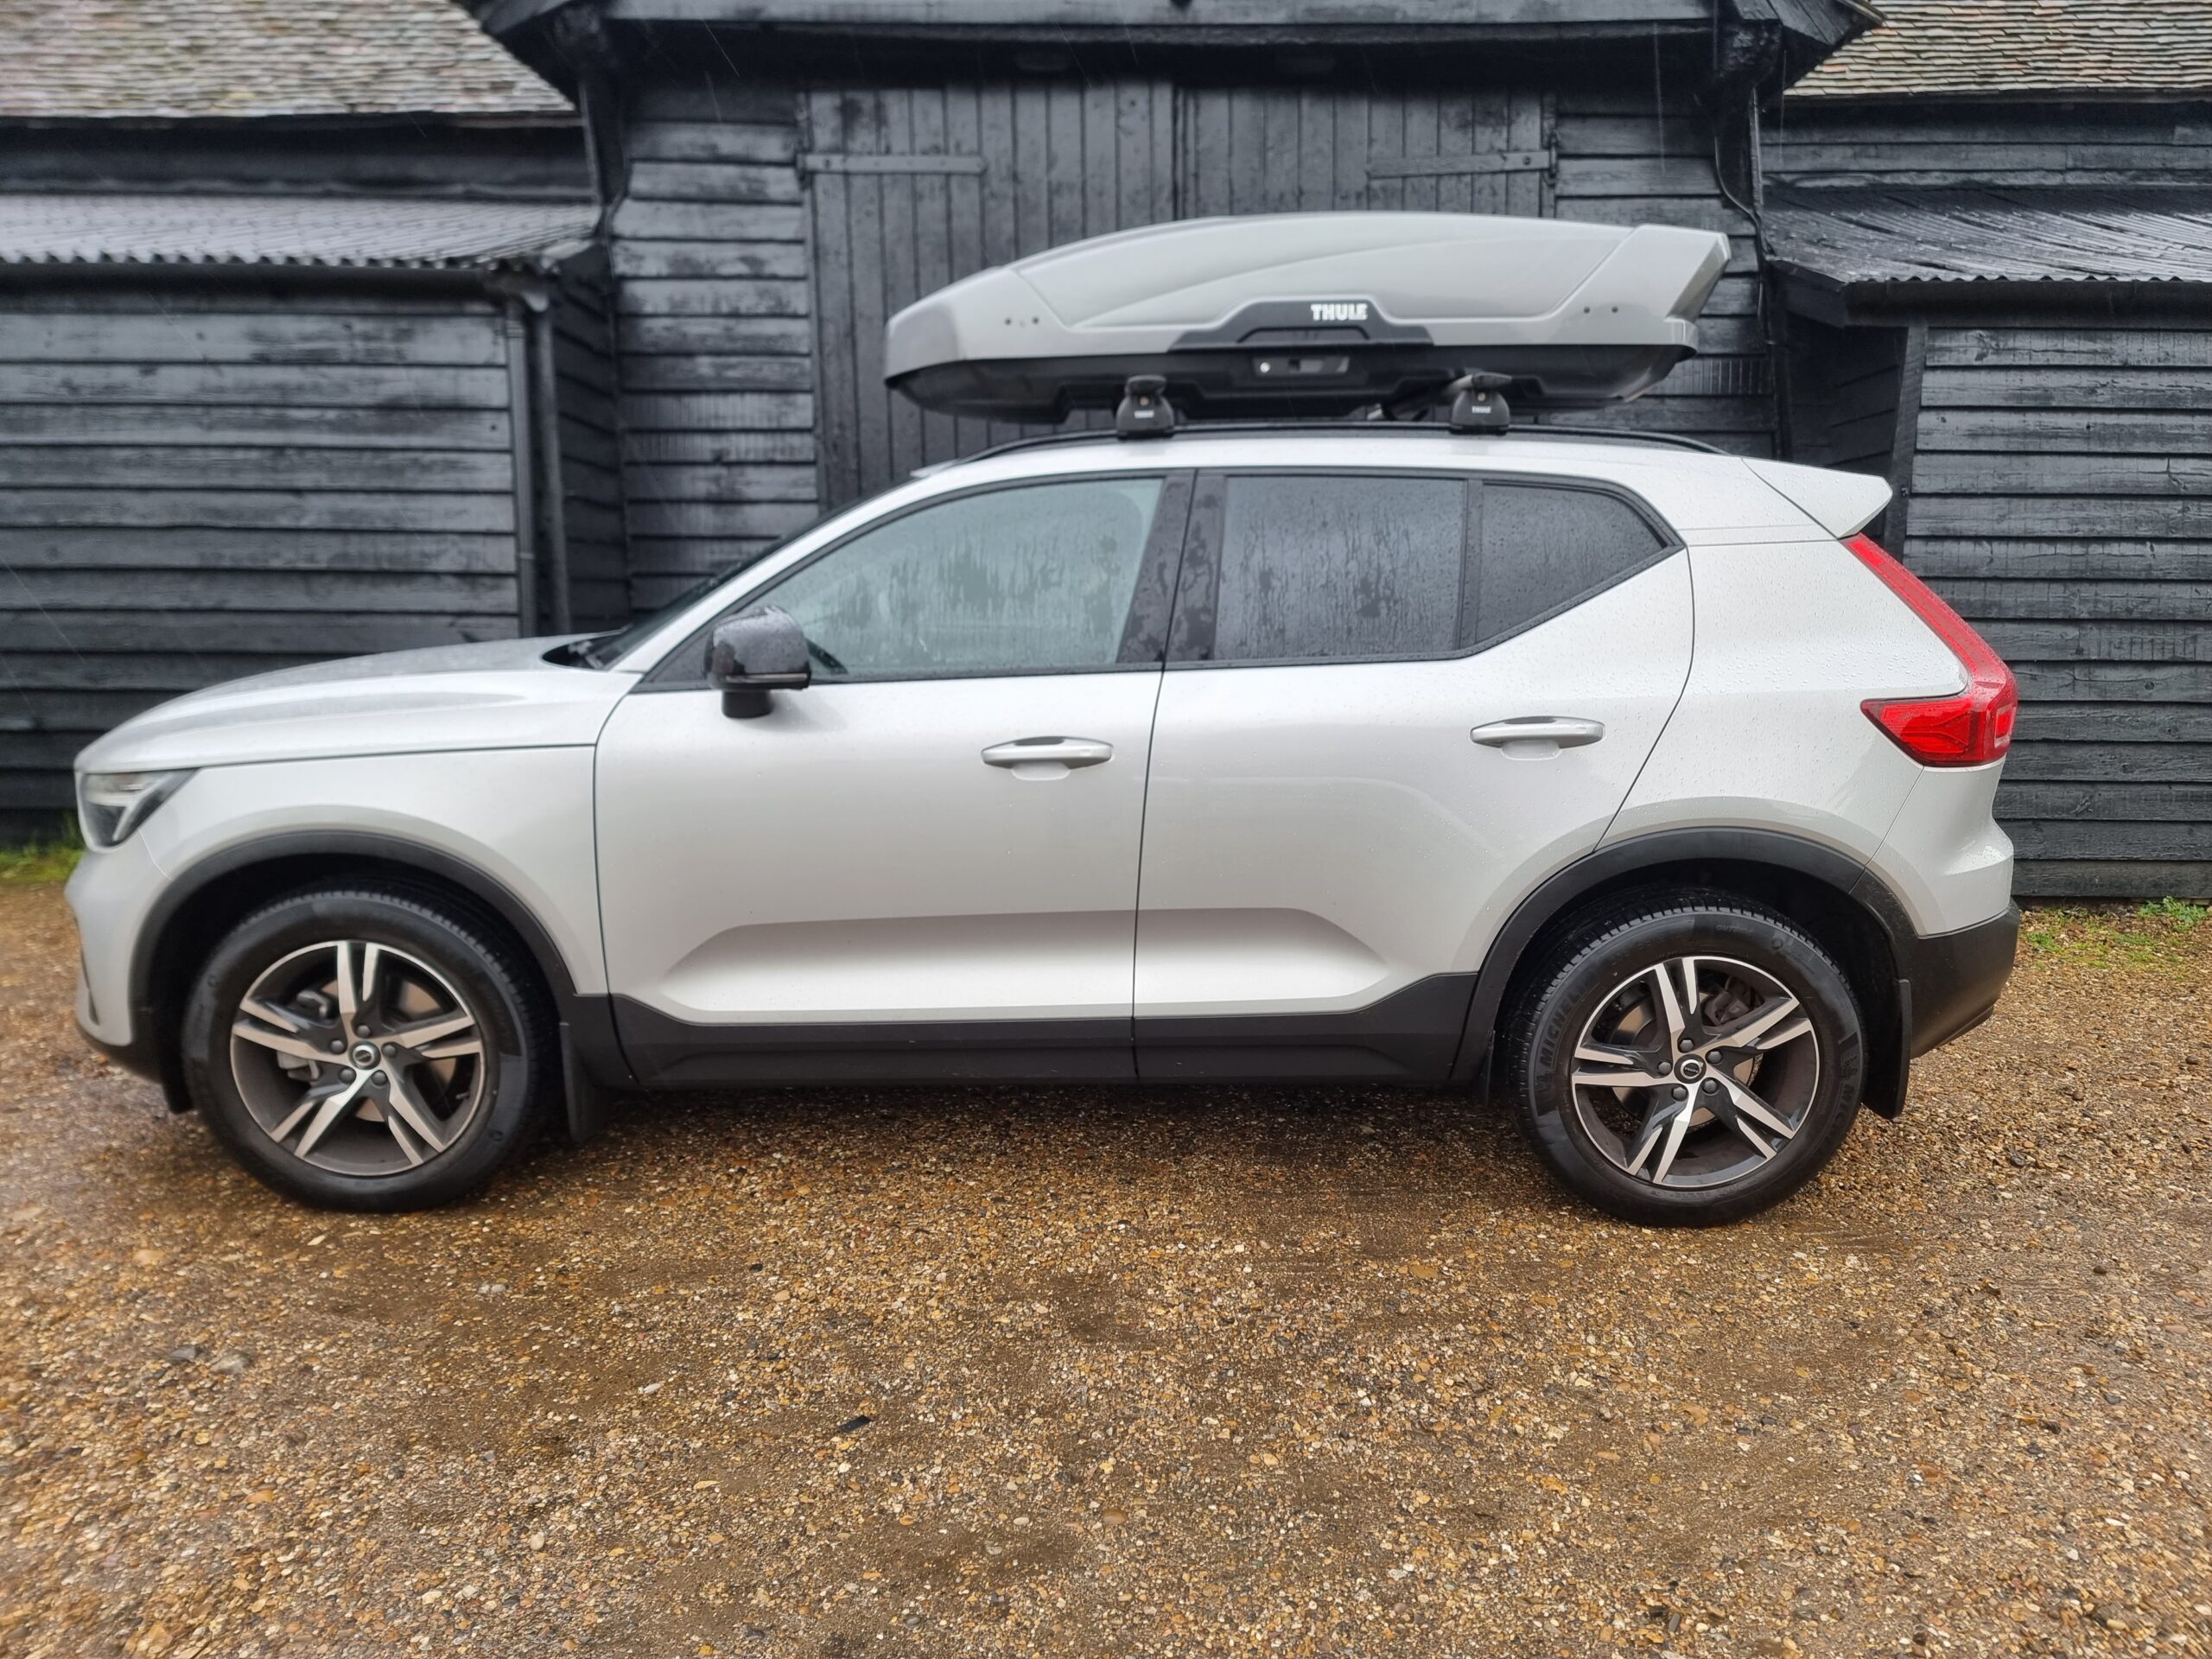 Volvo-XC40 with Thule lXT-L